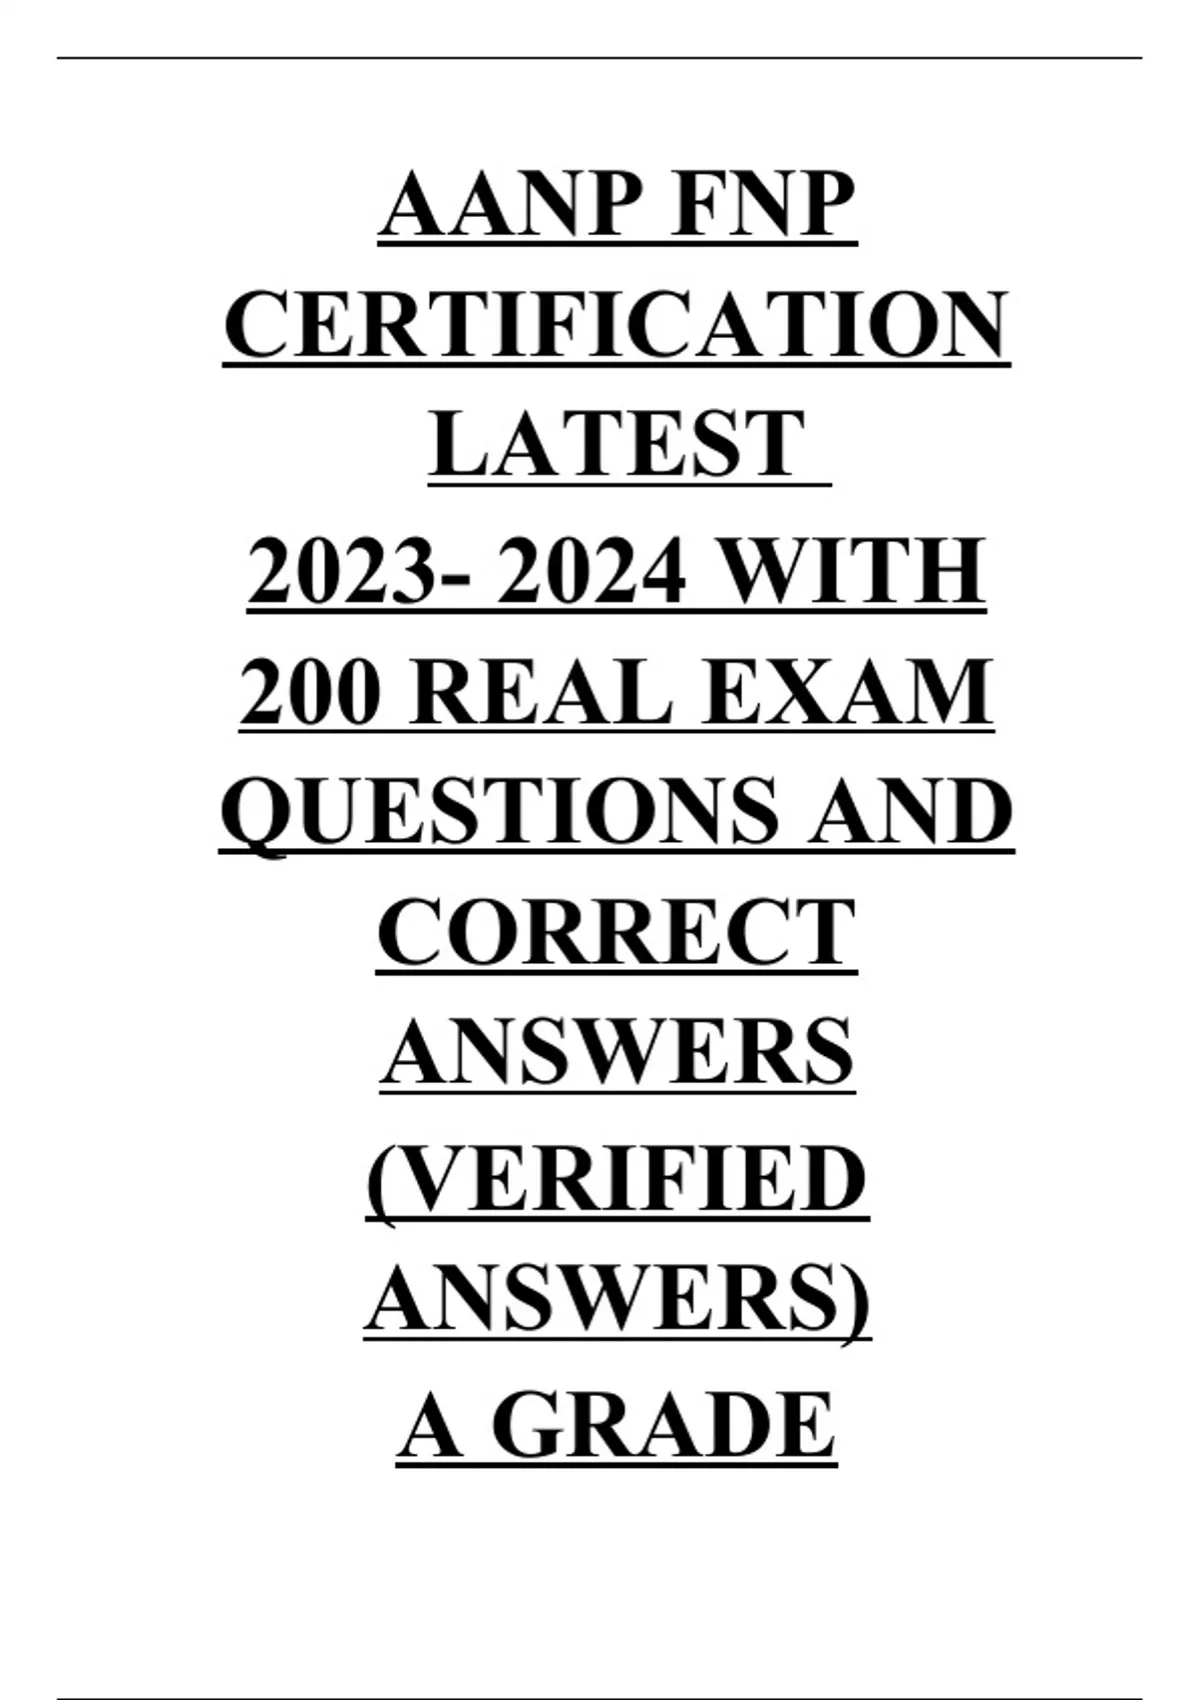 AANP FNP CERTIFICATION LATEST 20232024 WITH 200 REAL EXAM QUESTIONS